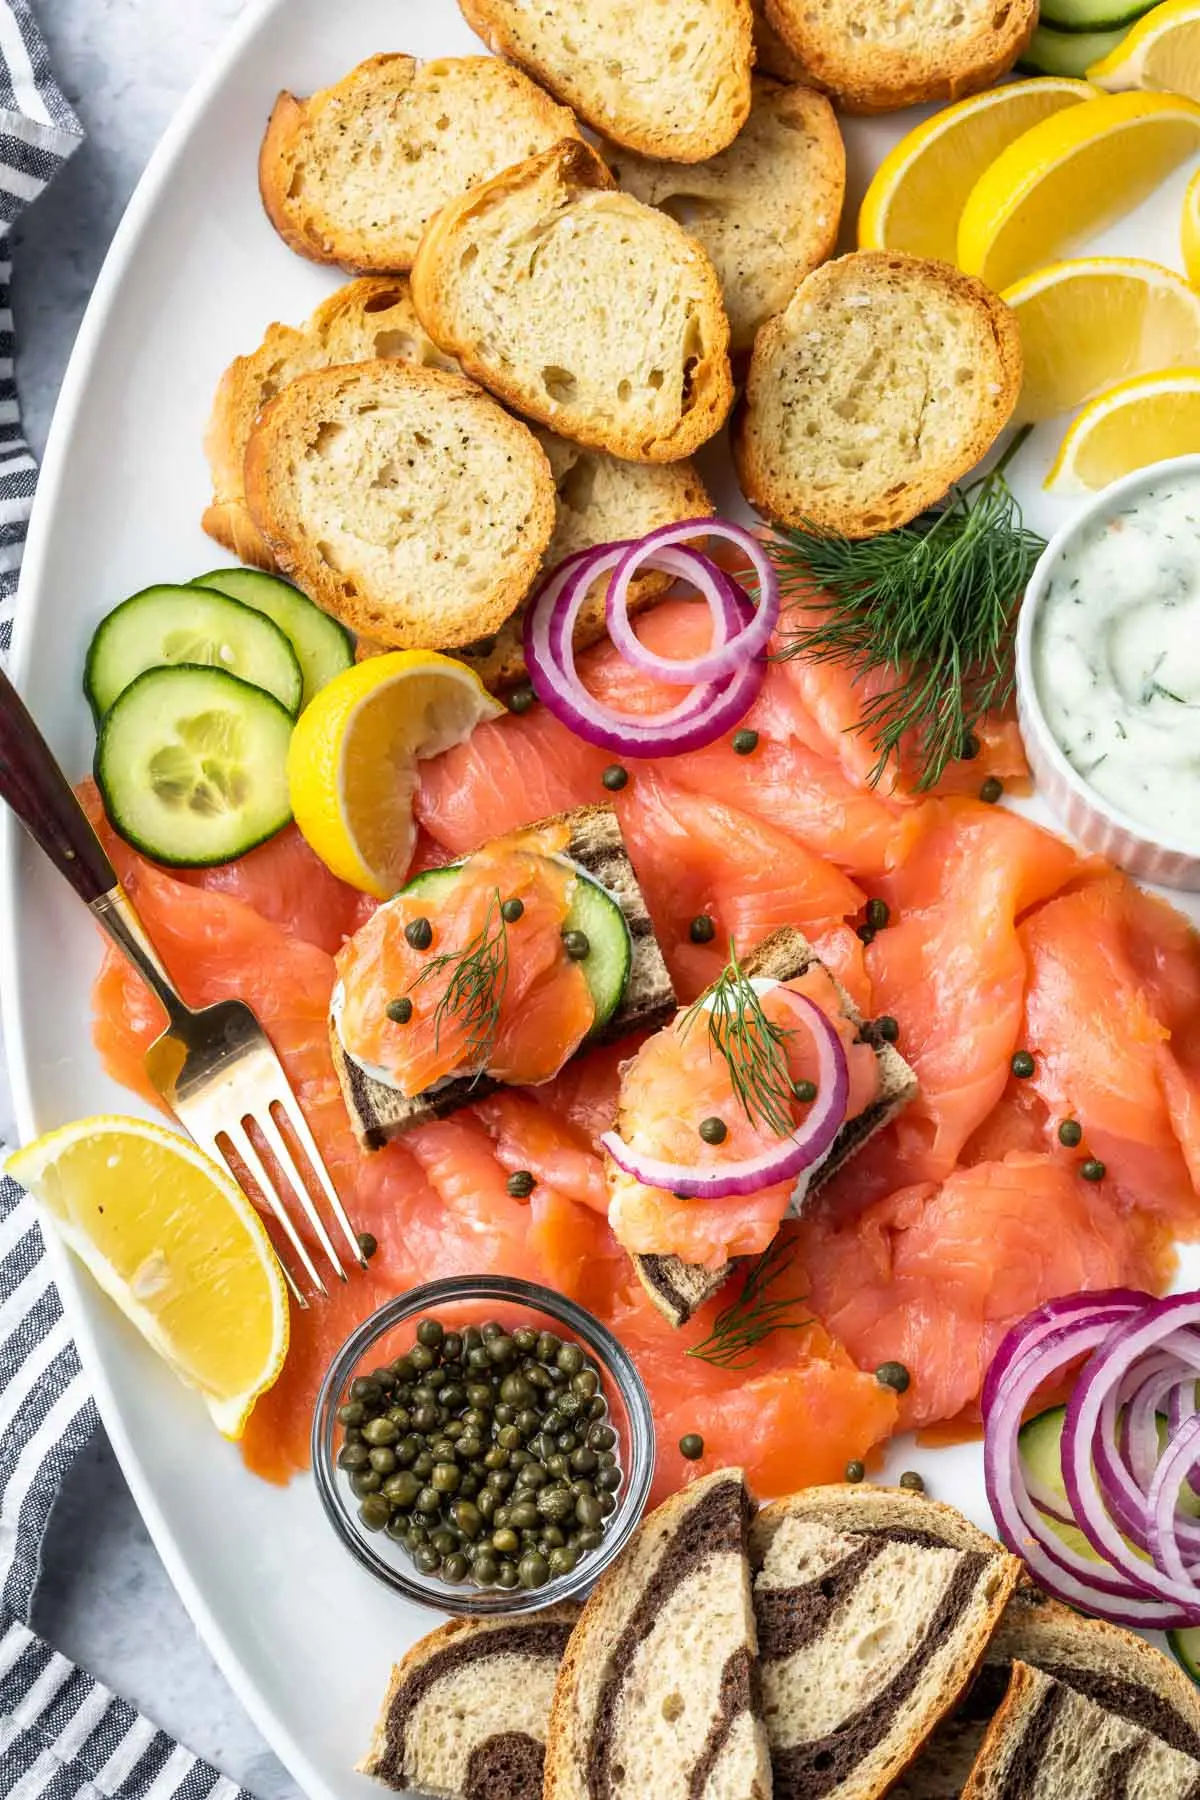 smoked salmon accompaniment - What fruit goes well with smoked salmon